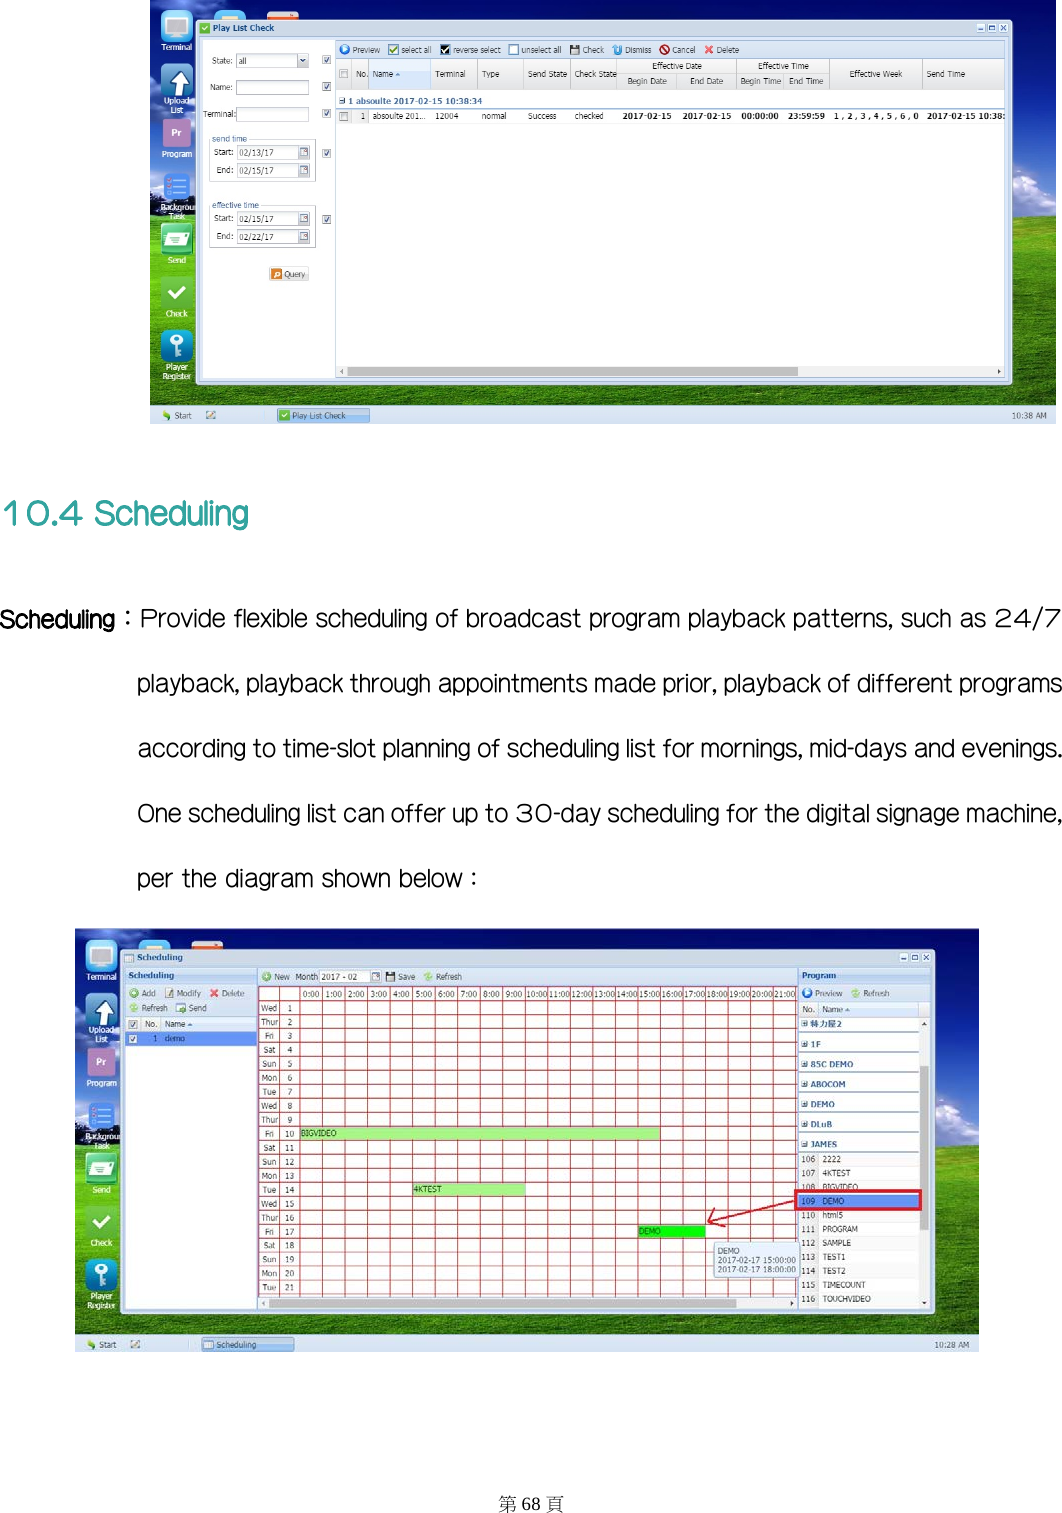  10.4 Scheduling Scheduling：Provide flexible scheduling of broadcast program playback patterns, such as 24/7 playback, playback through appointments made prior, playback of different programs according to time-slot planning of scheduling list for mornings, mid-days and evenings. One scheduling list can offer up to 30-day scheduling for the digital signage machine, per the diagram shown below：   第68 頁 